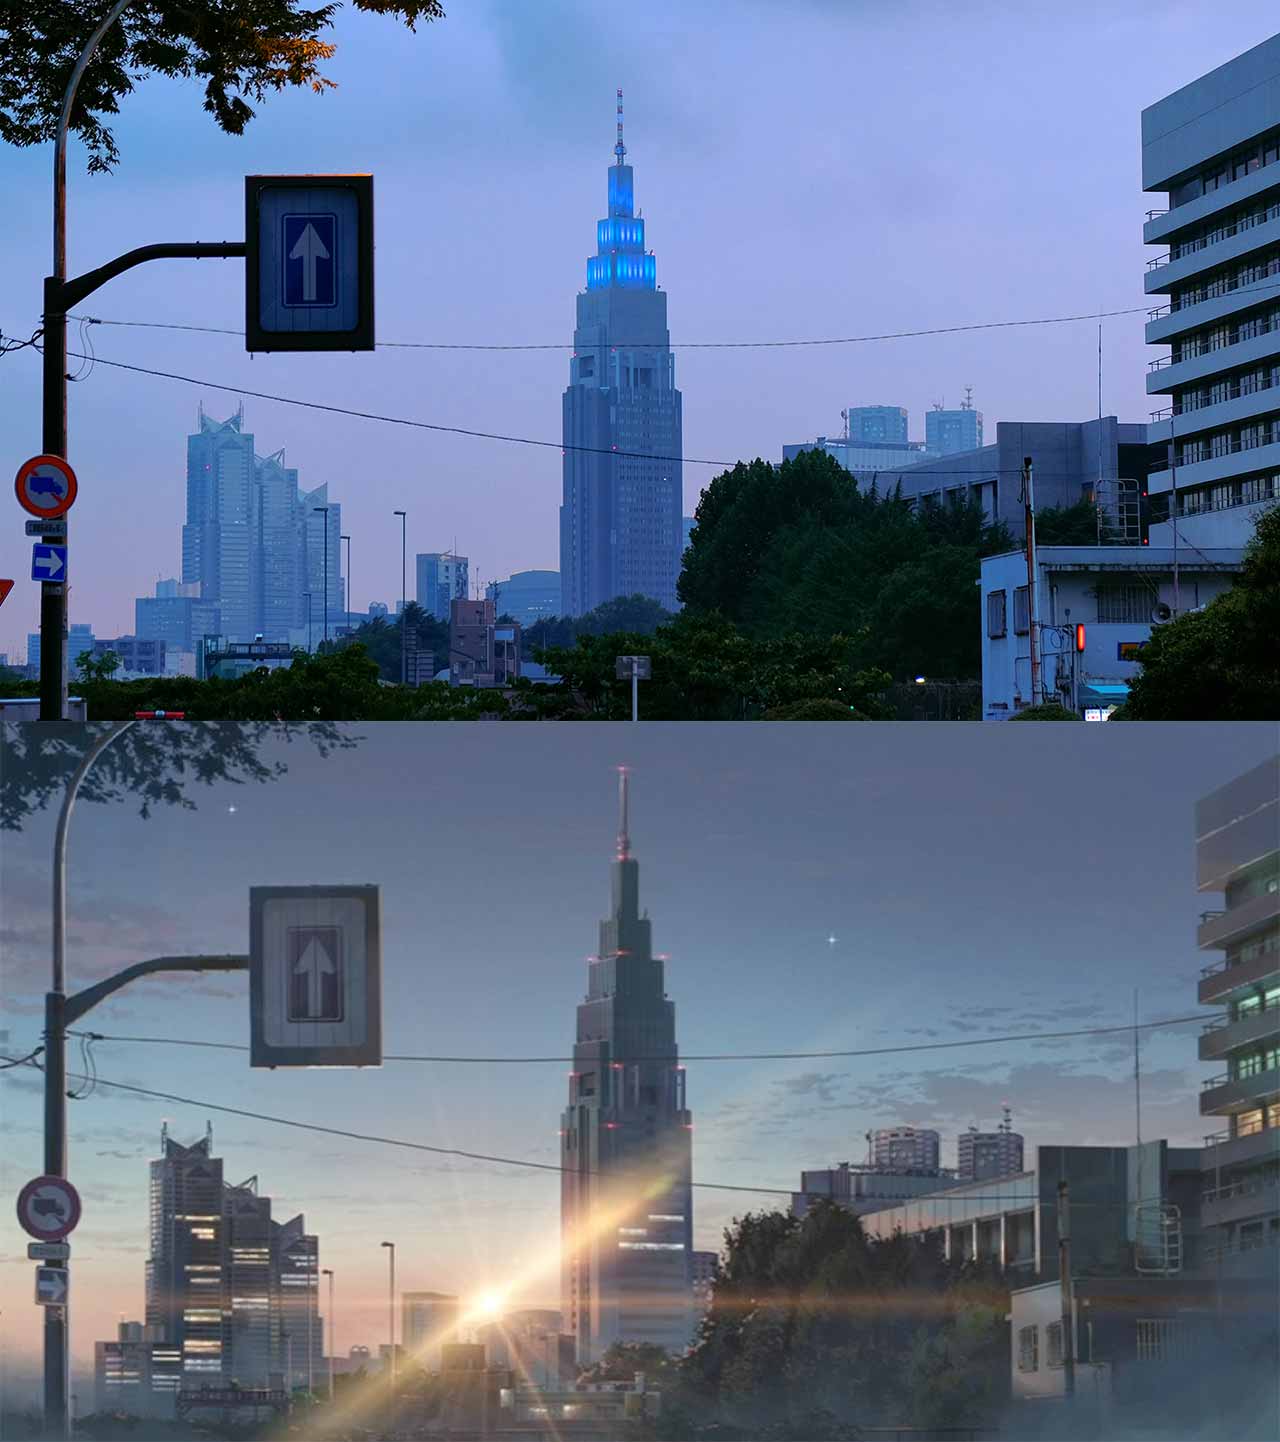 Your Name’s Anime Locations Compared With The Real-World Ones